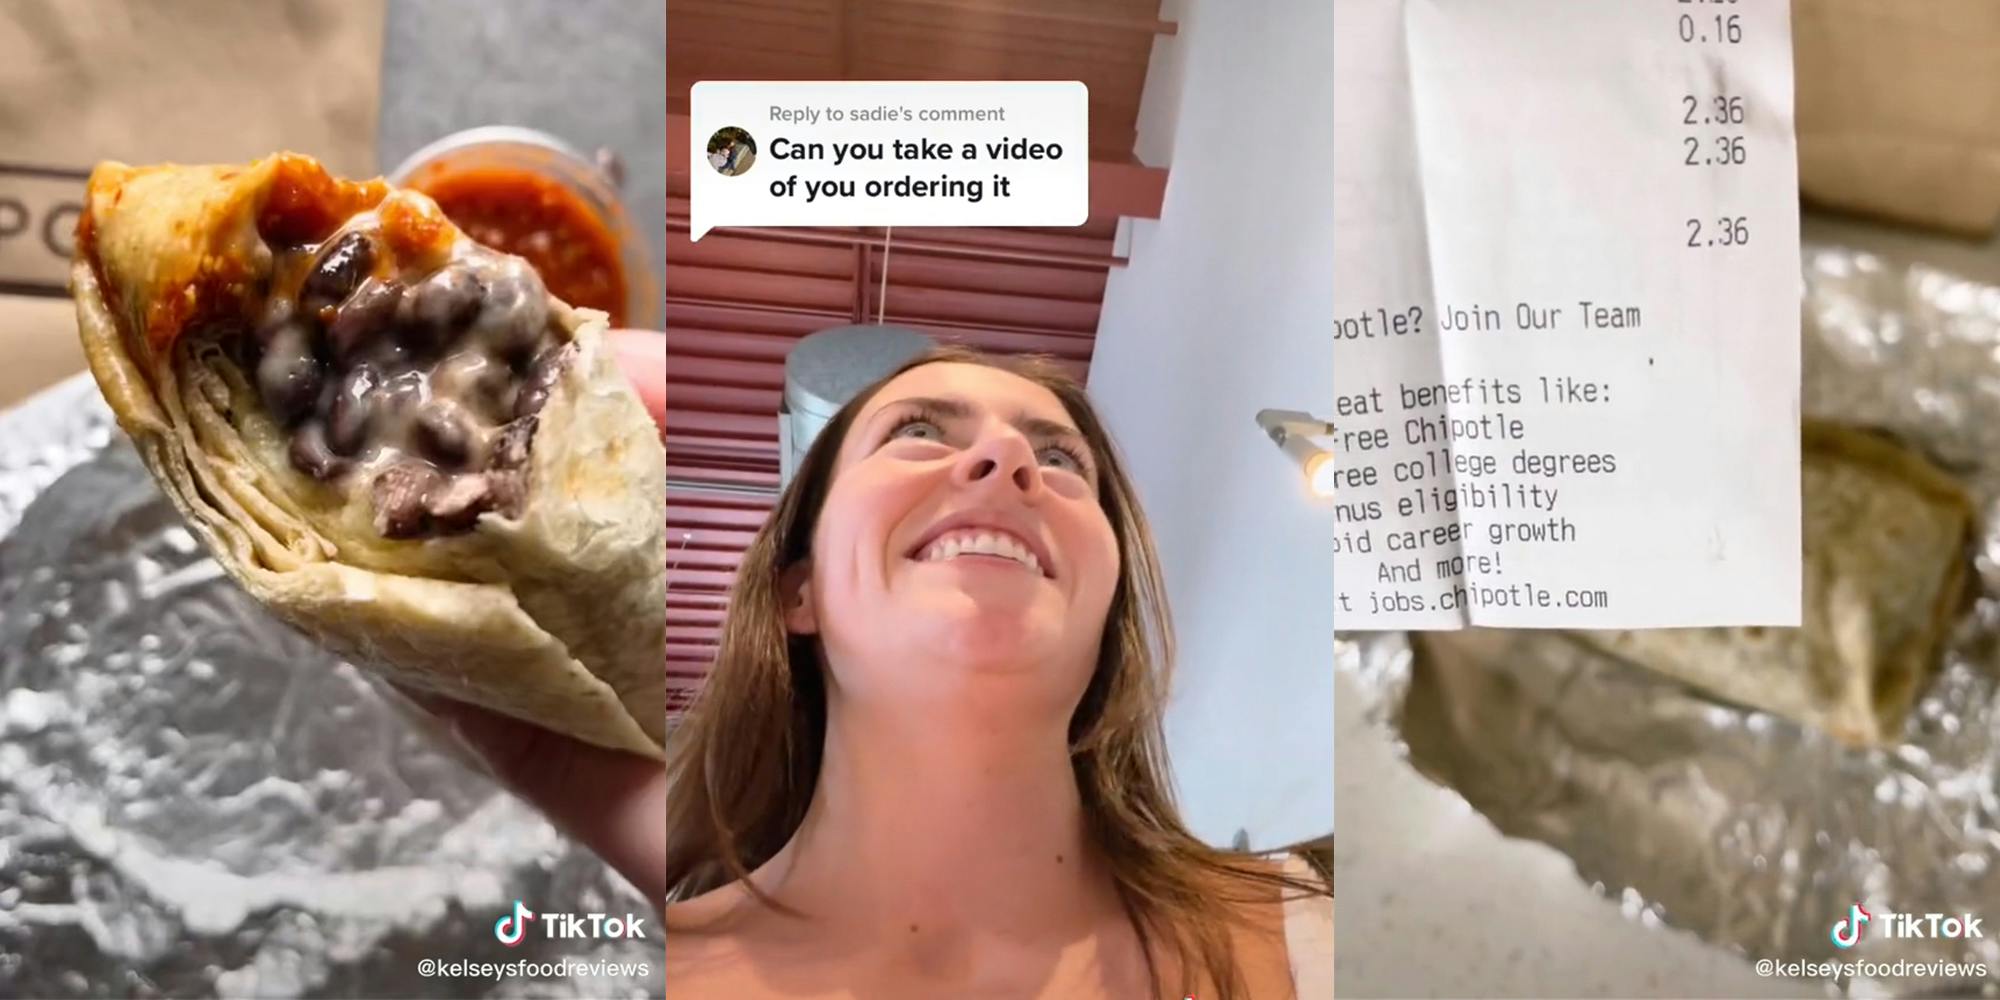 burrito with a bite taken out (l) woman smiling with caption "Can you take a video of you ordering it" (c) receipt showing 2.36 (r)